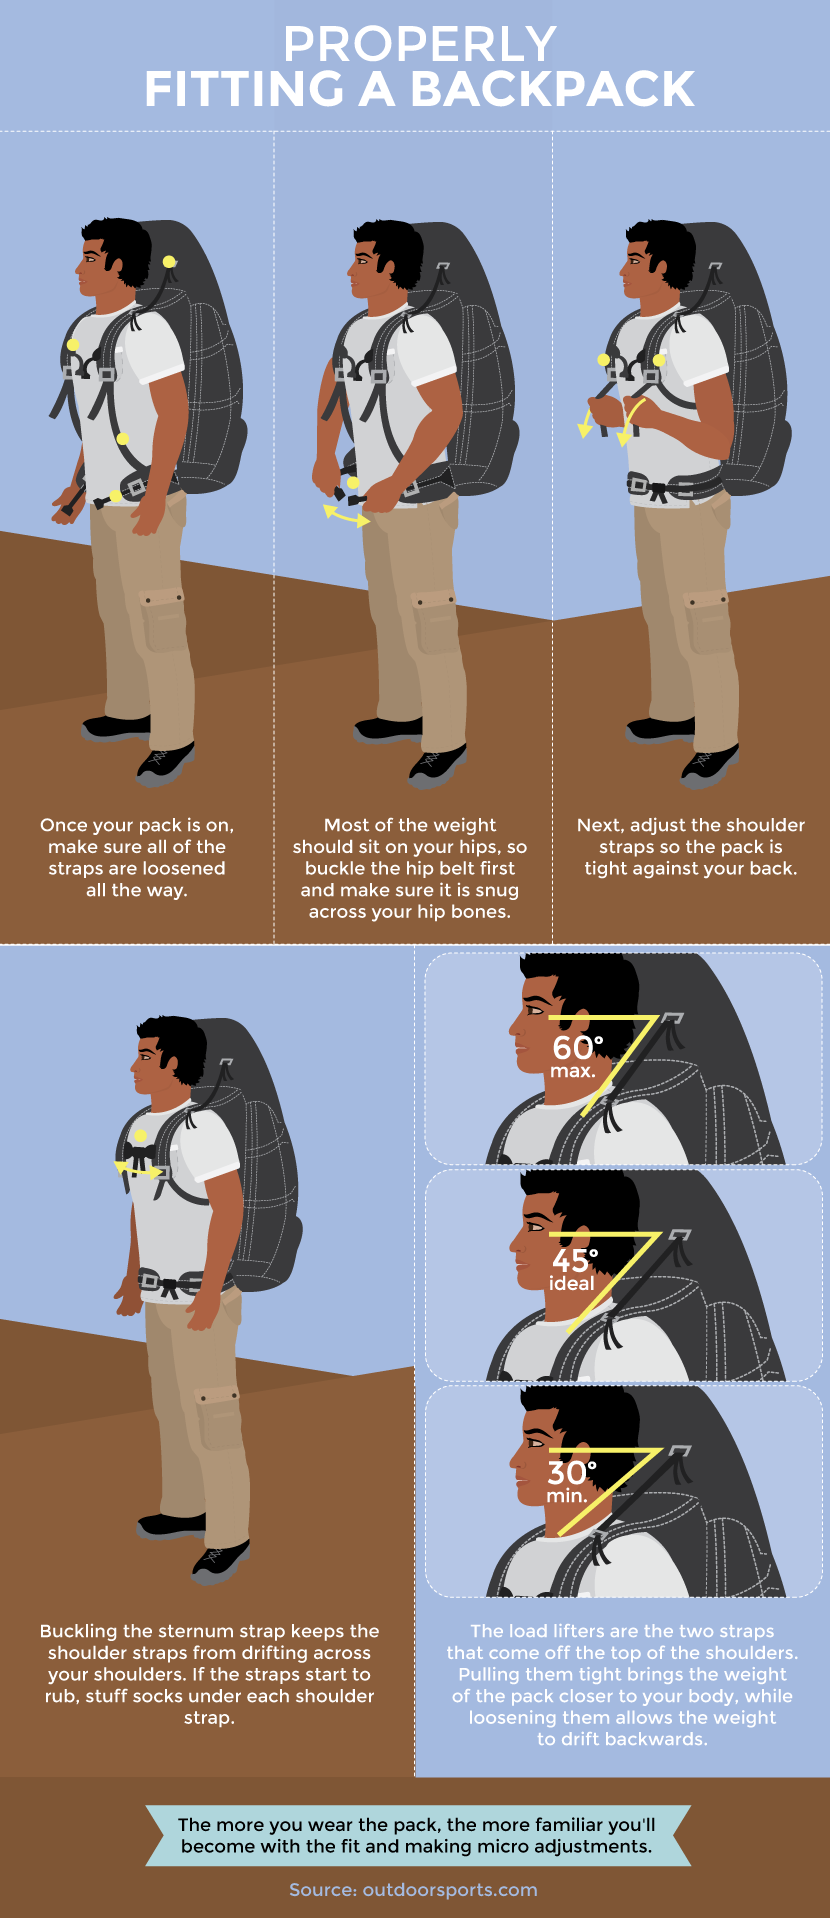 Fitting Your Backpack